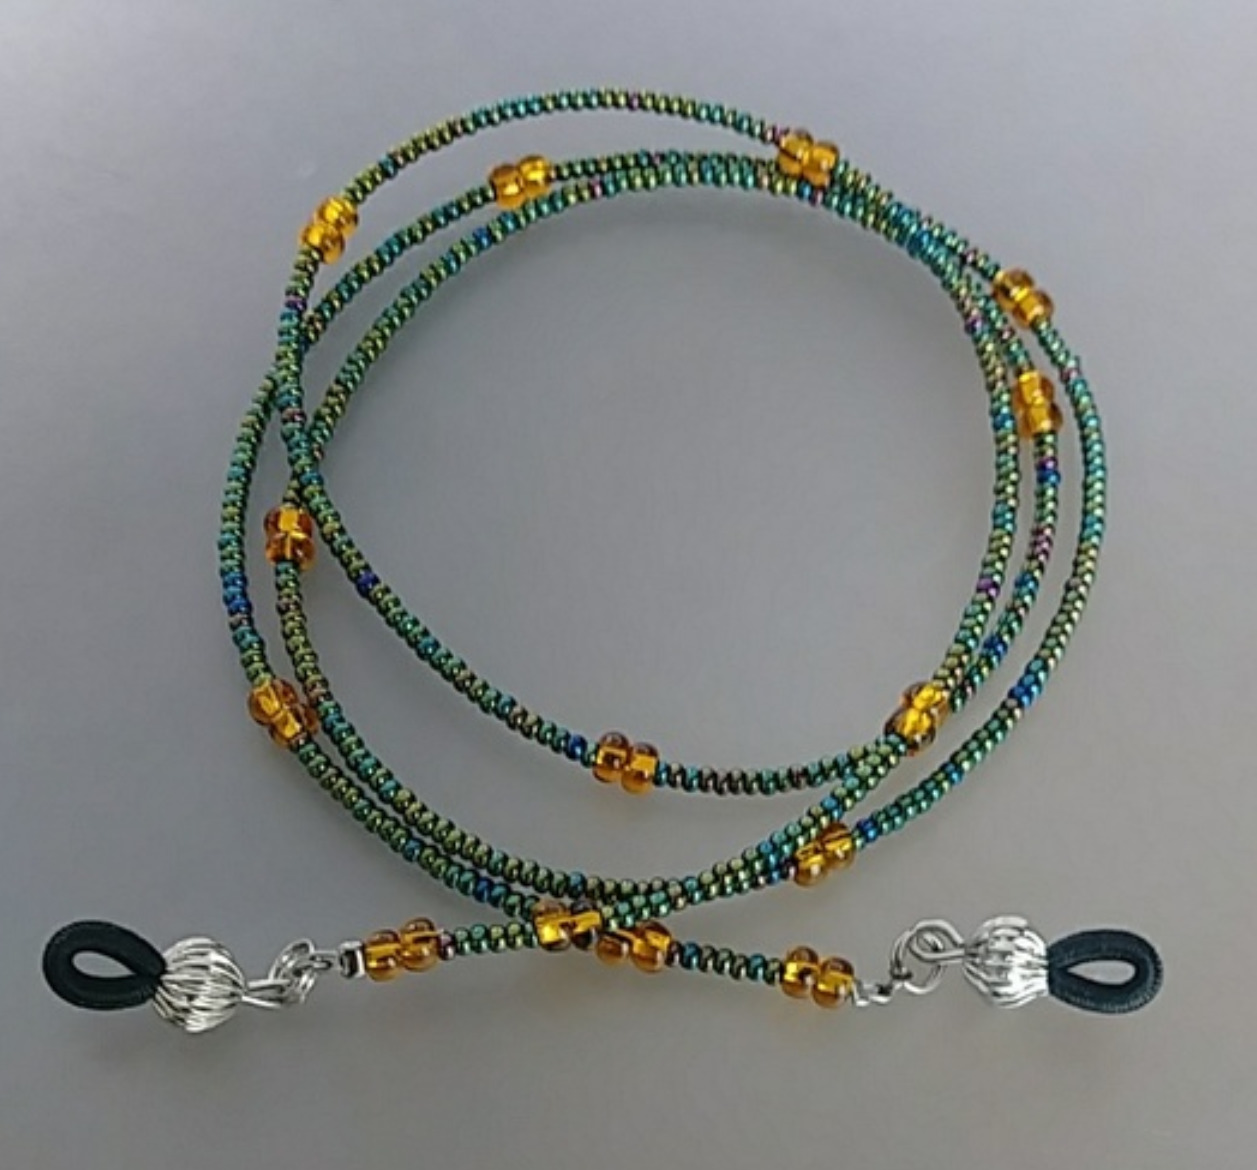 (702-EGC) - Description: Glass and Seed Beads, Silver-Tone Eyeglass Connectors  - Dimension: 29 1/2 ' L (Inches)